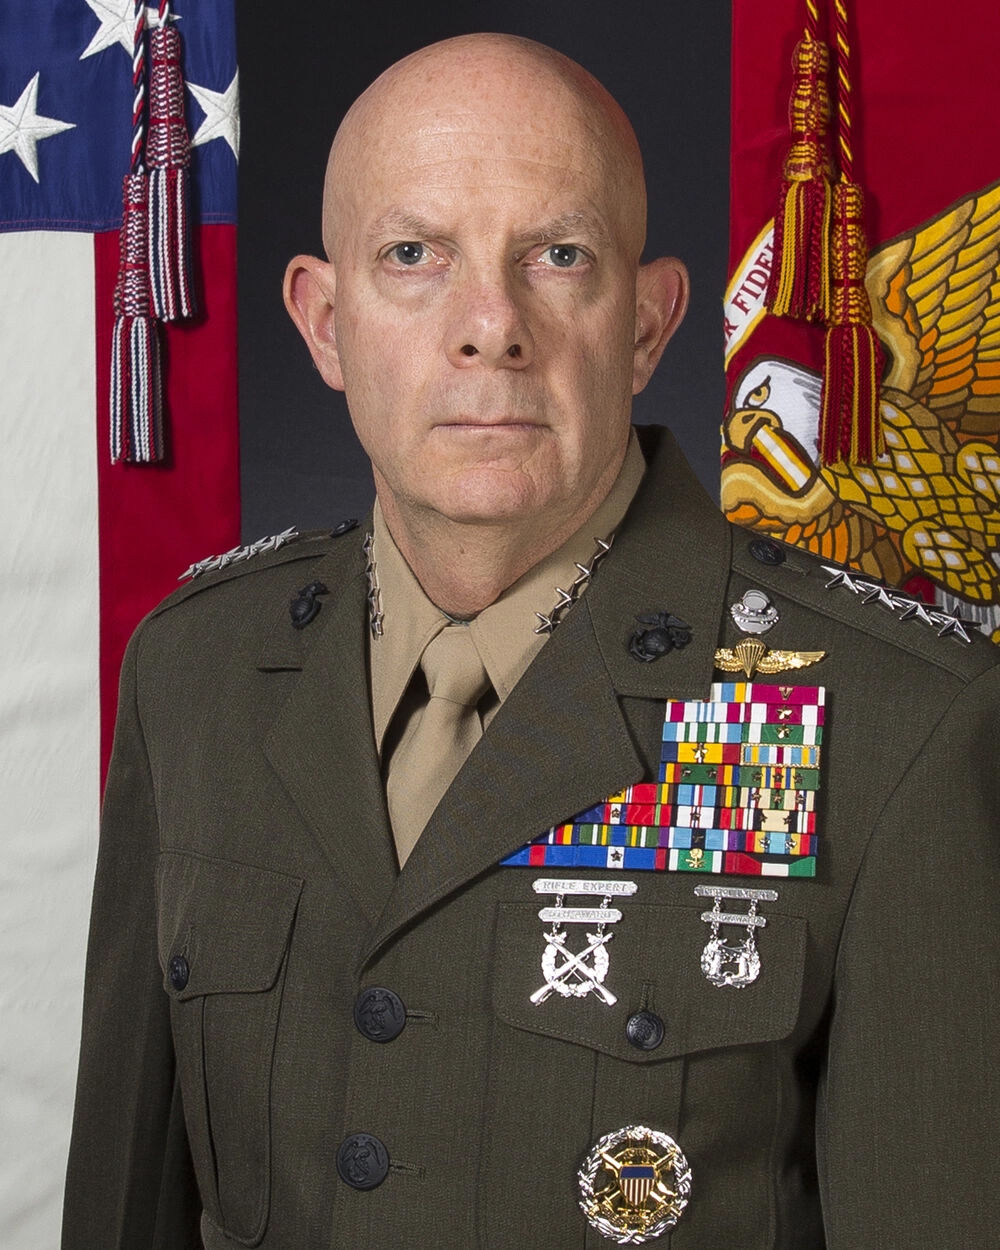 247th USMC birthday message from the Commandant of the Marine Corps